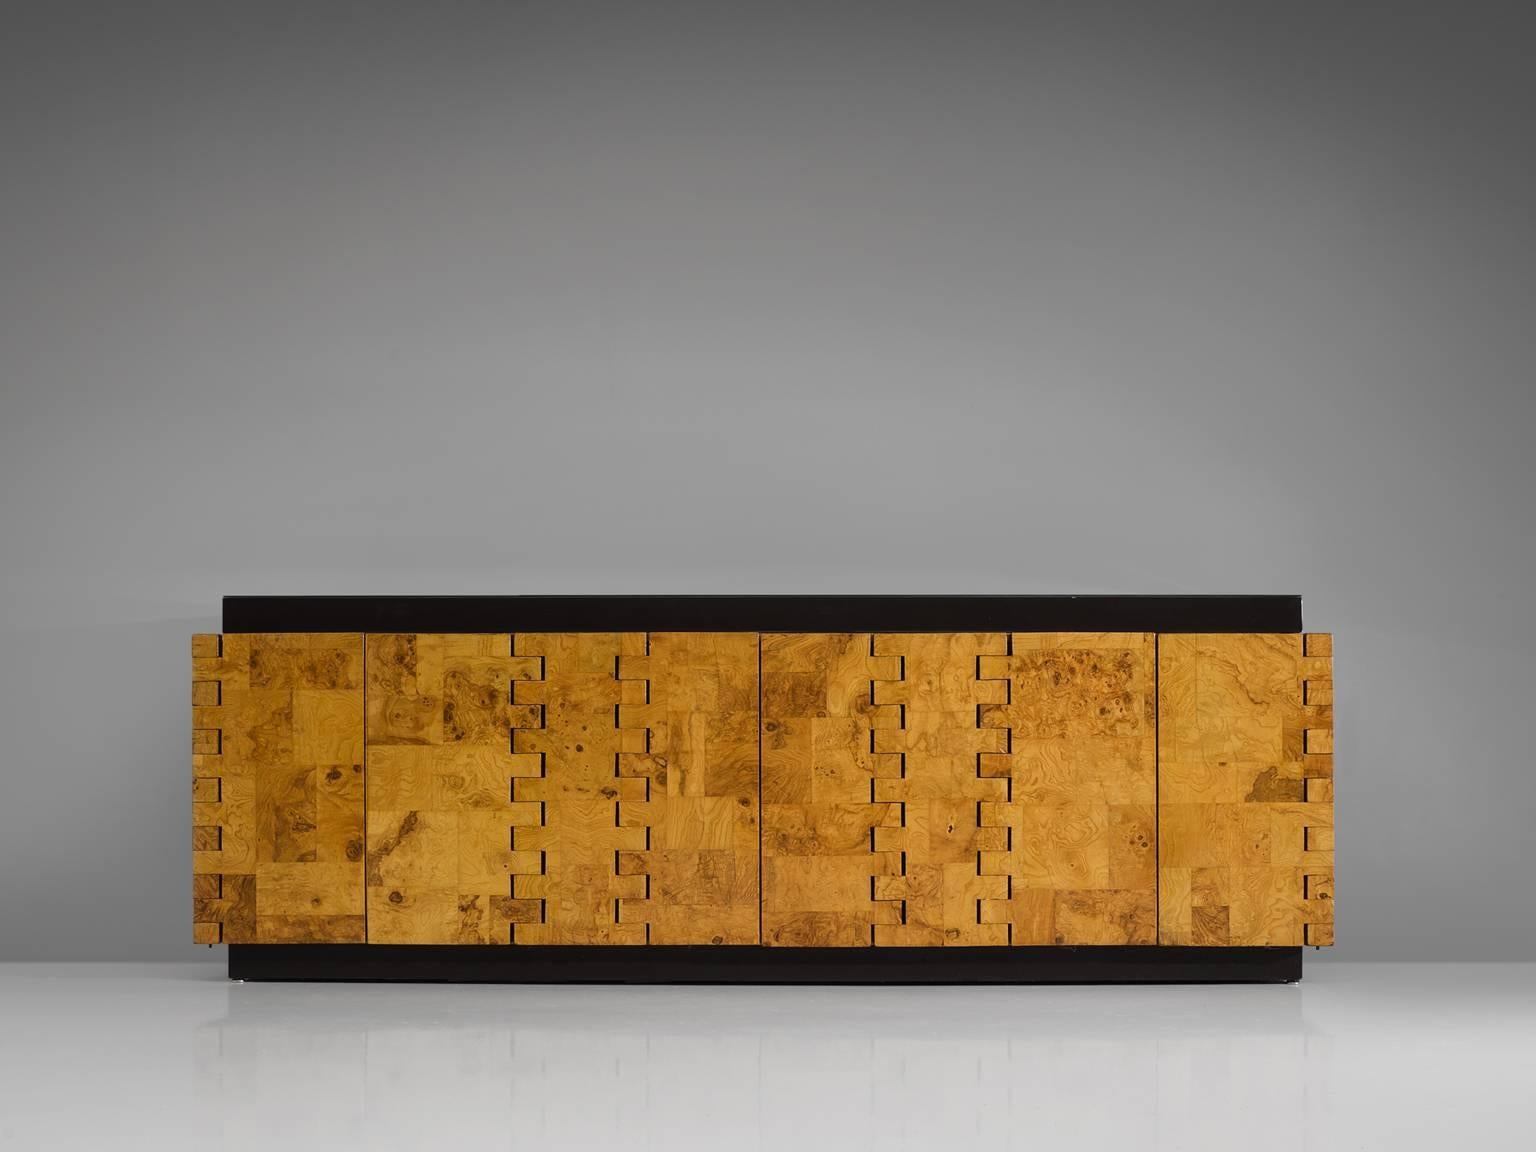 Paul Evans, cabinet model PE4, in burl, wood and glass, United States, 1970s. 

Burl sideboard by American designer Paul Evans. This cabinet shows a patchwork motive of olive burl wood. Evans is known for the use of patchwork, especially on his